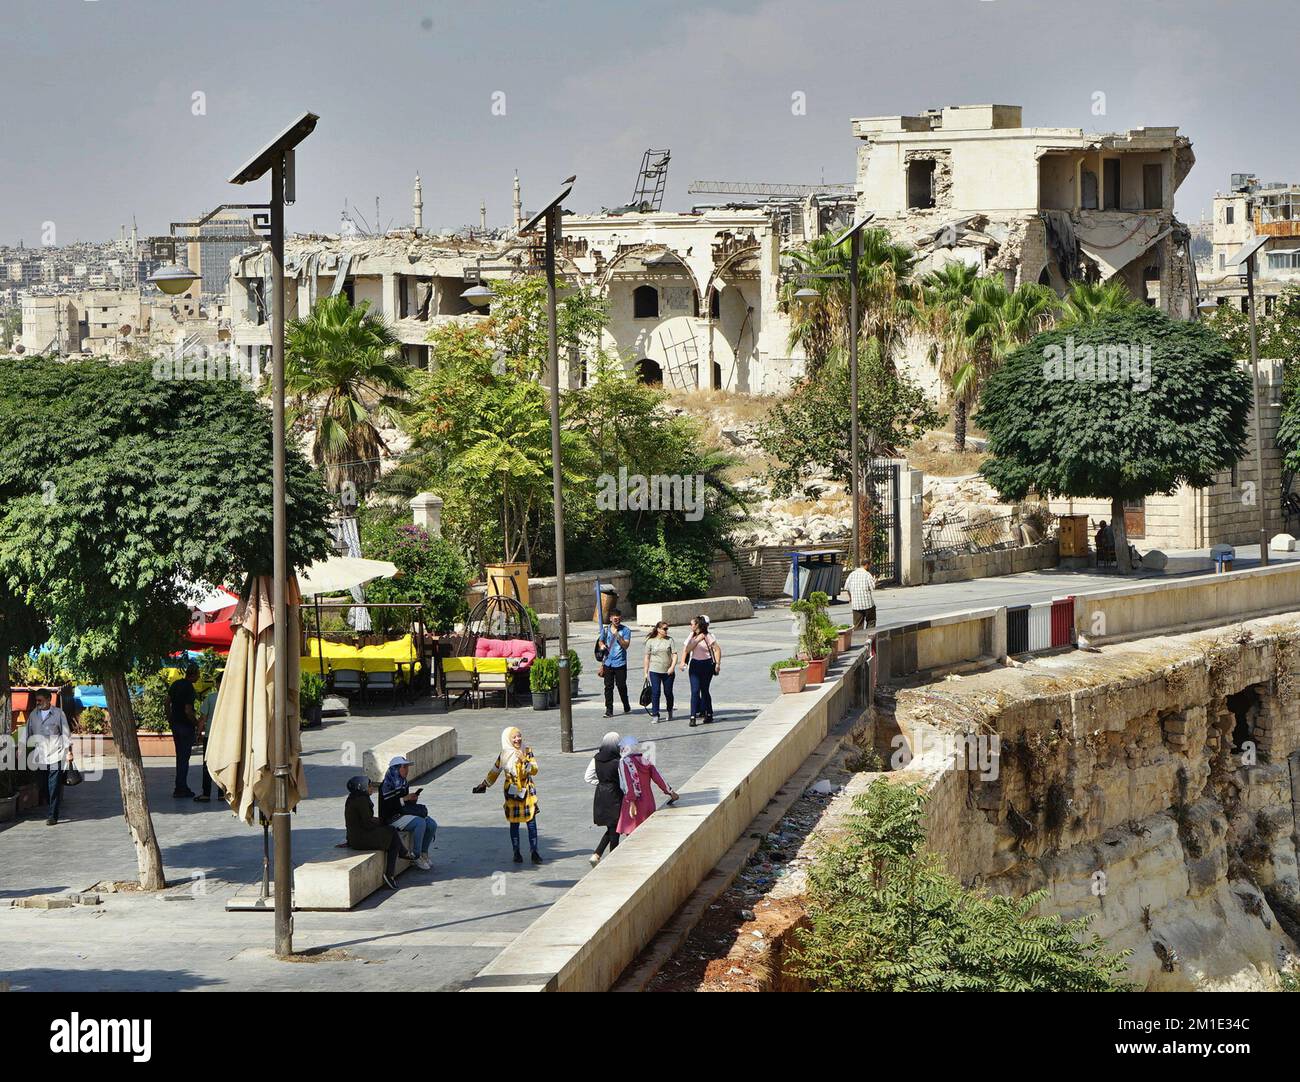 The square in front of the citadel of Aleppo, Syria Stock Photo